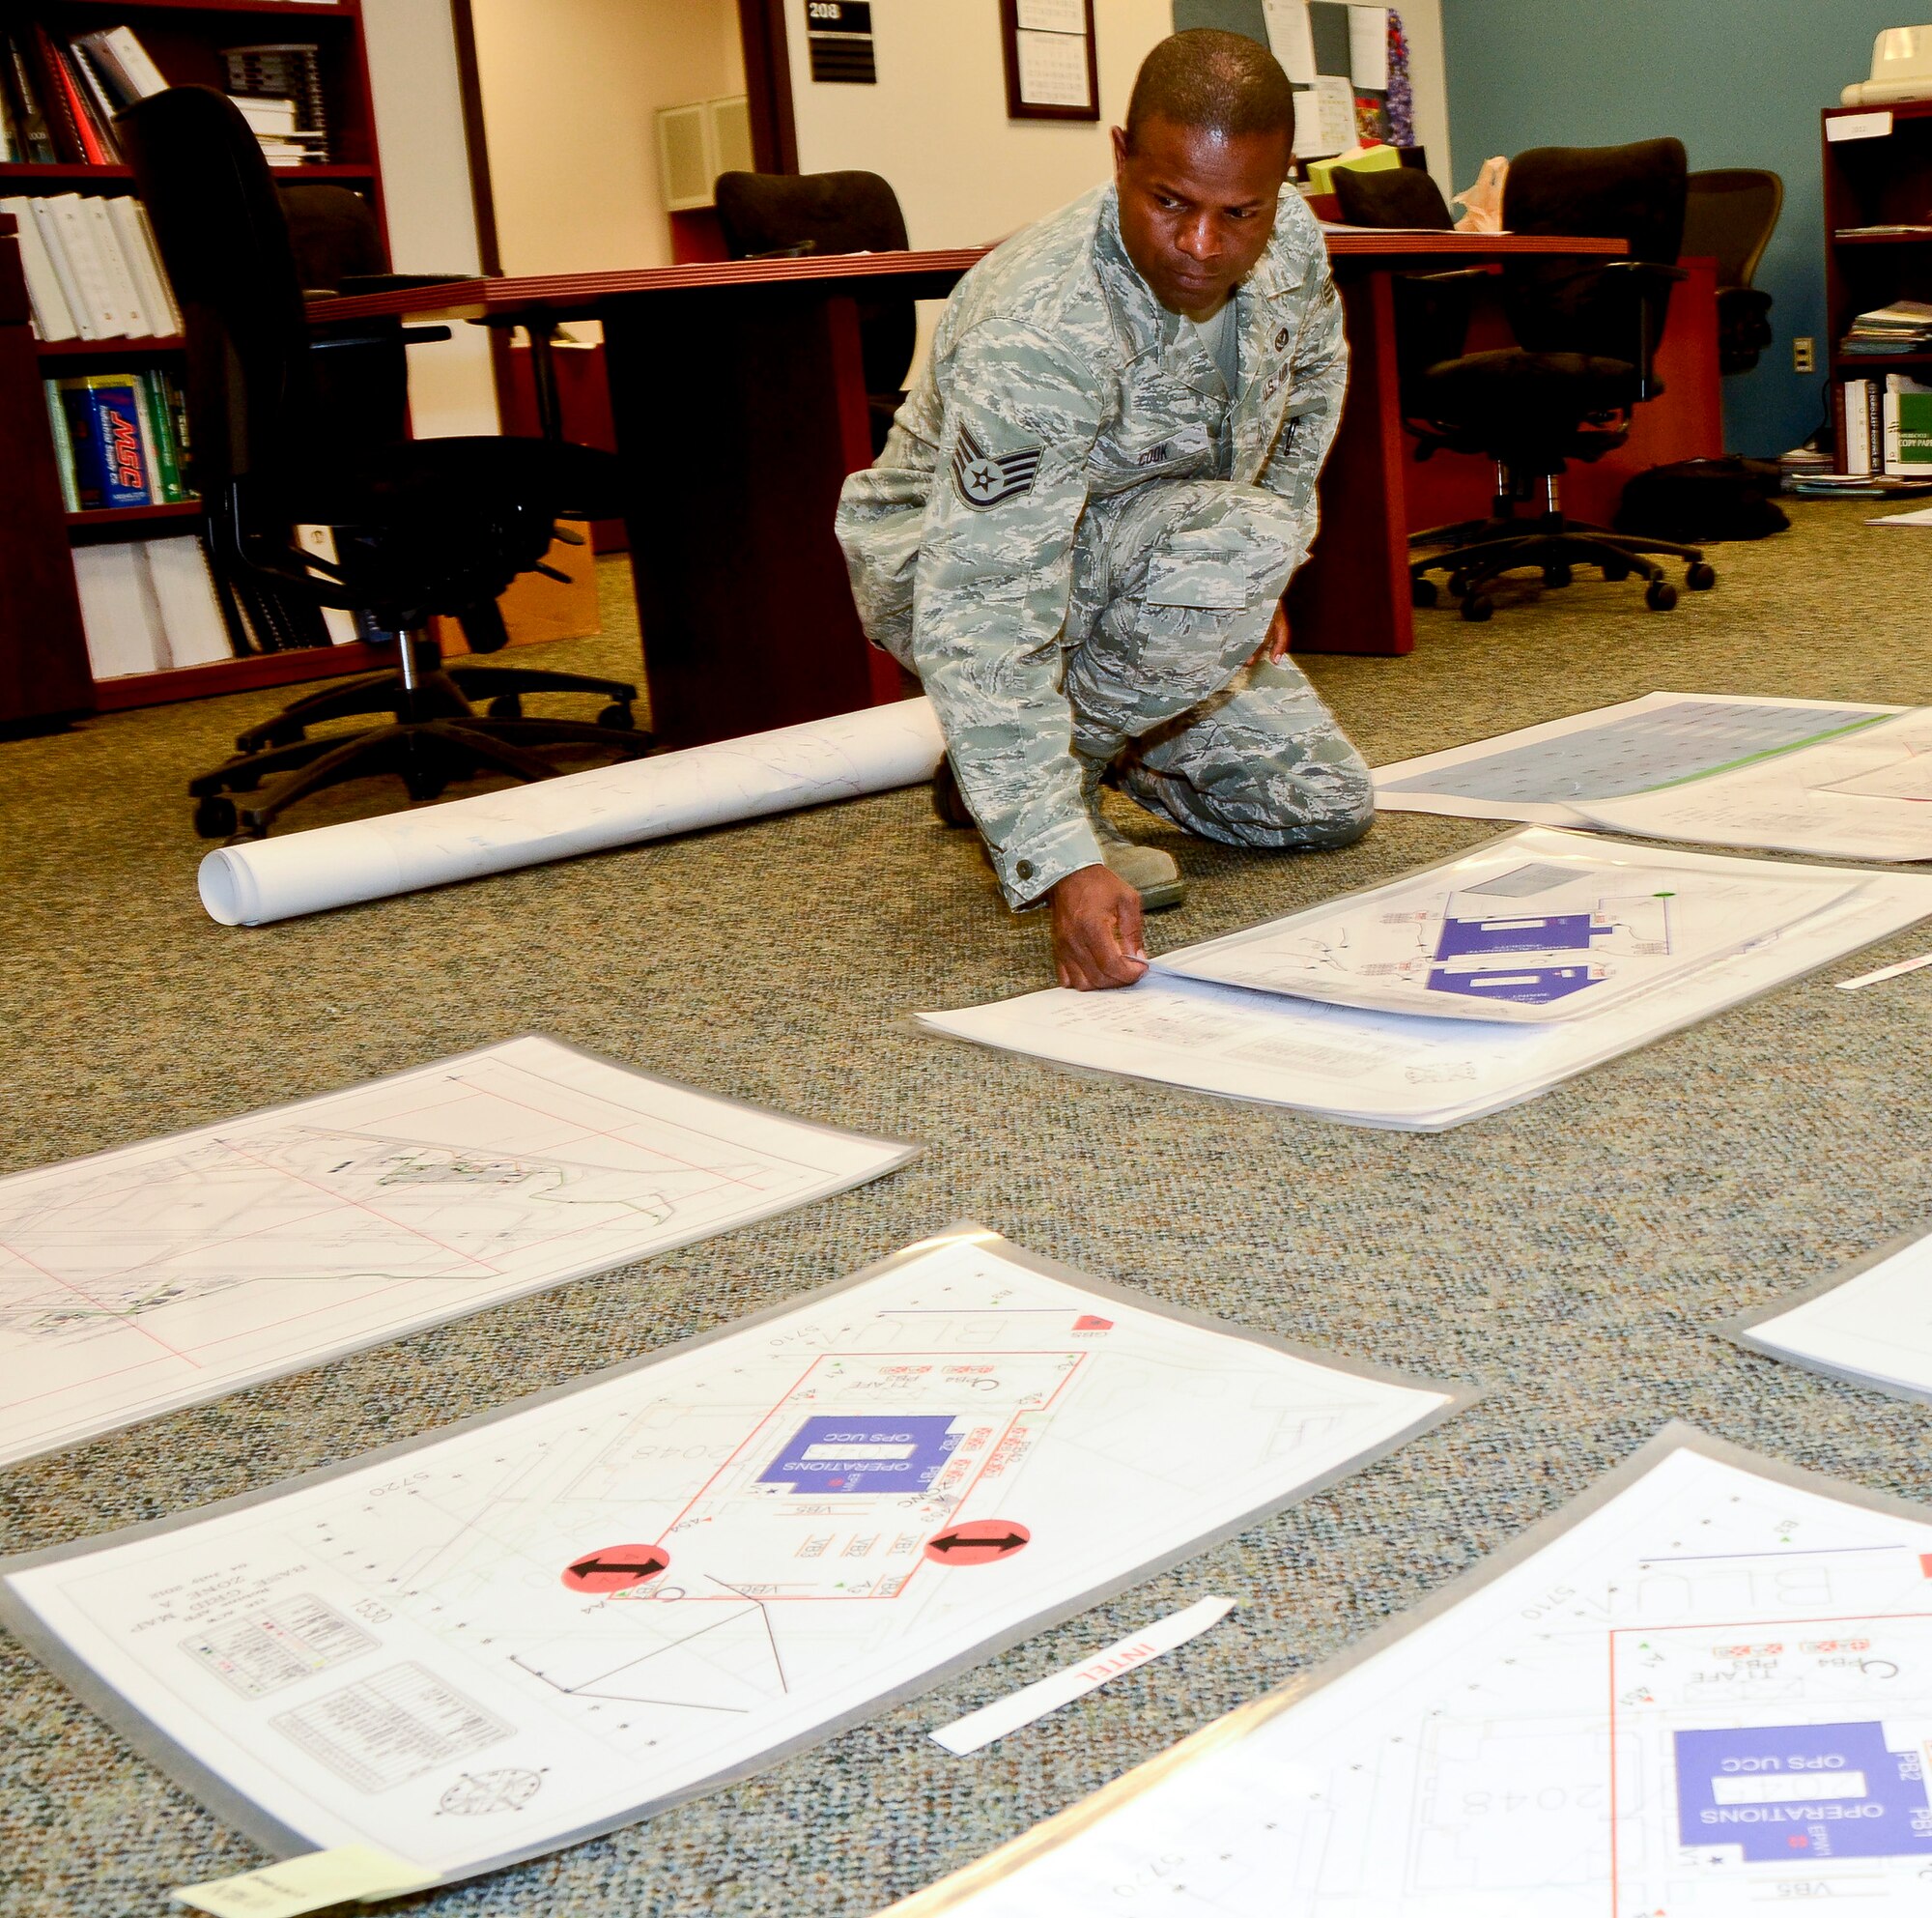 Air National Guard Staff Sgt. Columbus Cook, 116th Civil Engineering Squadron, lays out newly engineered maps he and his team developed for the Team Joint STARS Operational Readiness Exercise, Robins Air Force Base, Ga., July 10, 2012.  Cook played a key role in developing the new user-friendly maps based on the Army's Military Grid Reference System.  ( National Guard photo by Master Sgt. Roger Parsons/Released)